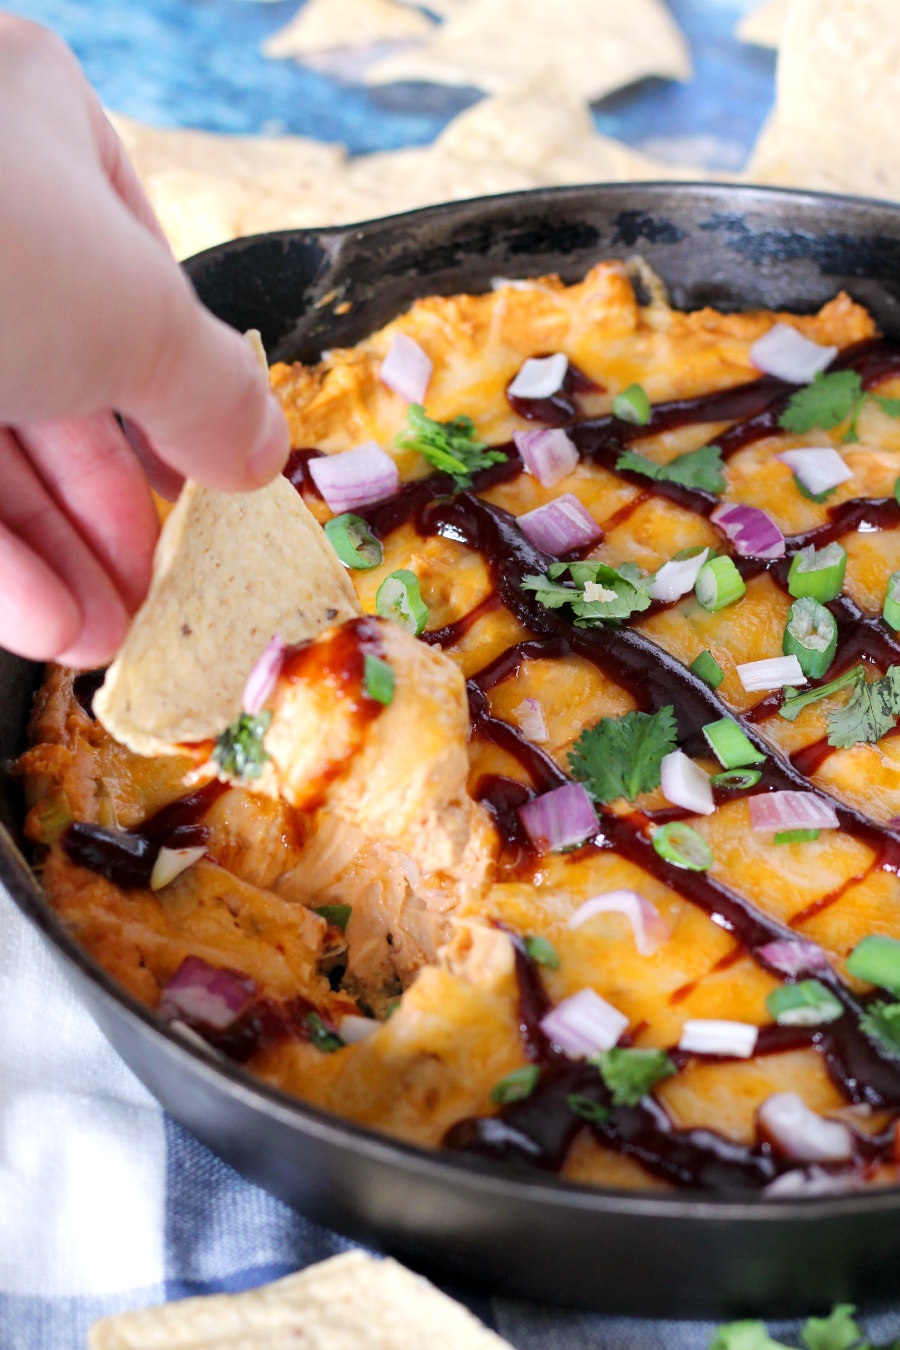 Home entertaining just got more delicious with this simple, loaded BBQ Chicken Skillet Dip. This easy appetizer uses cream cheese, rotisserie chicken, barbecue sauce, green onions, cheddar, and spices to make a hearty dip that holds up to your favorite chips!